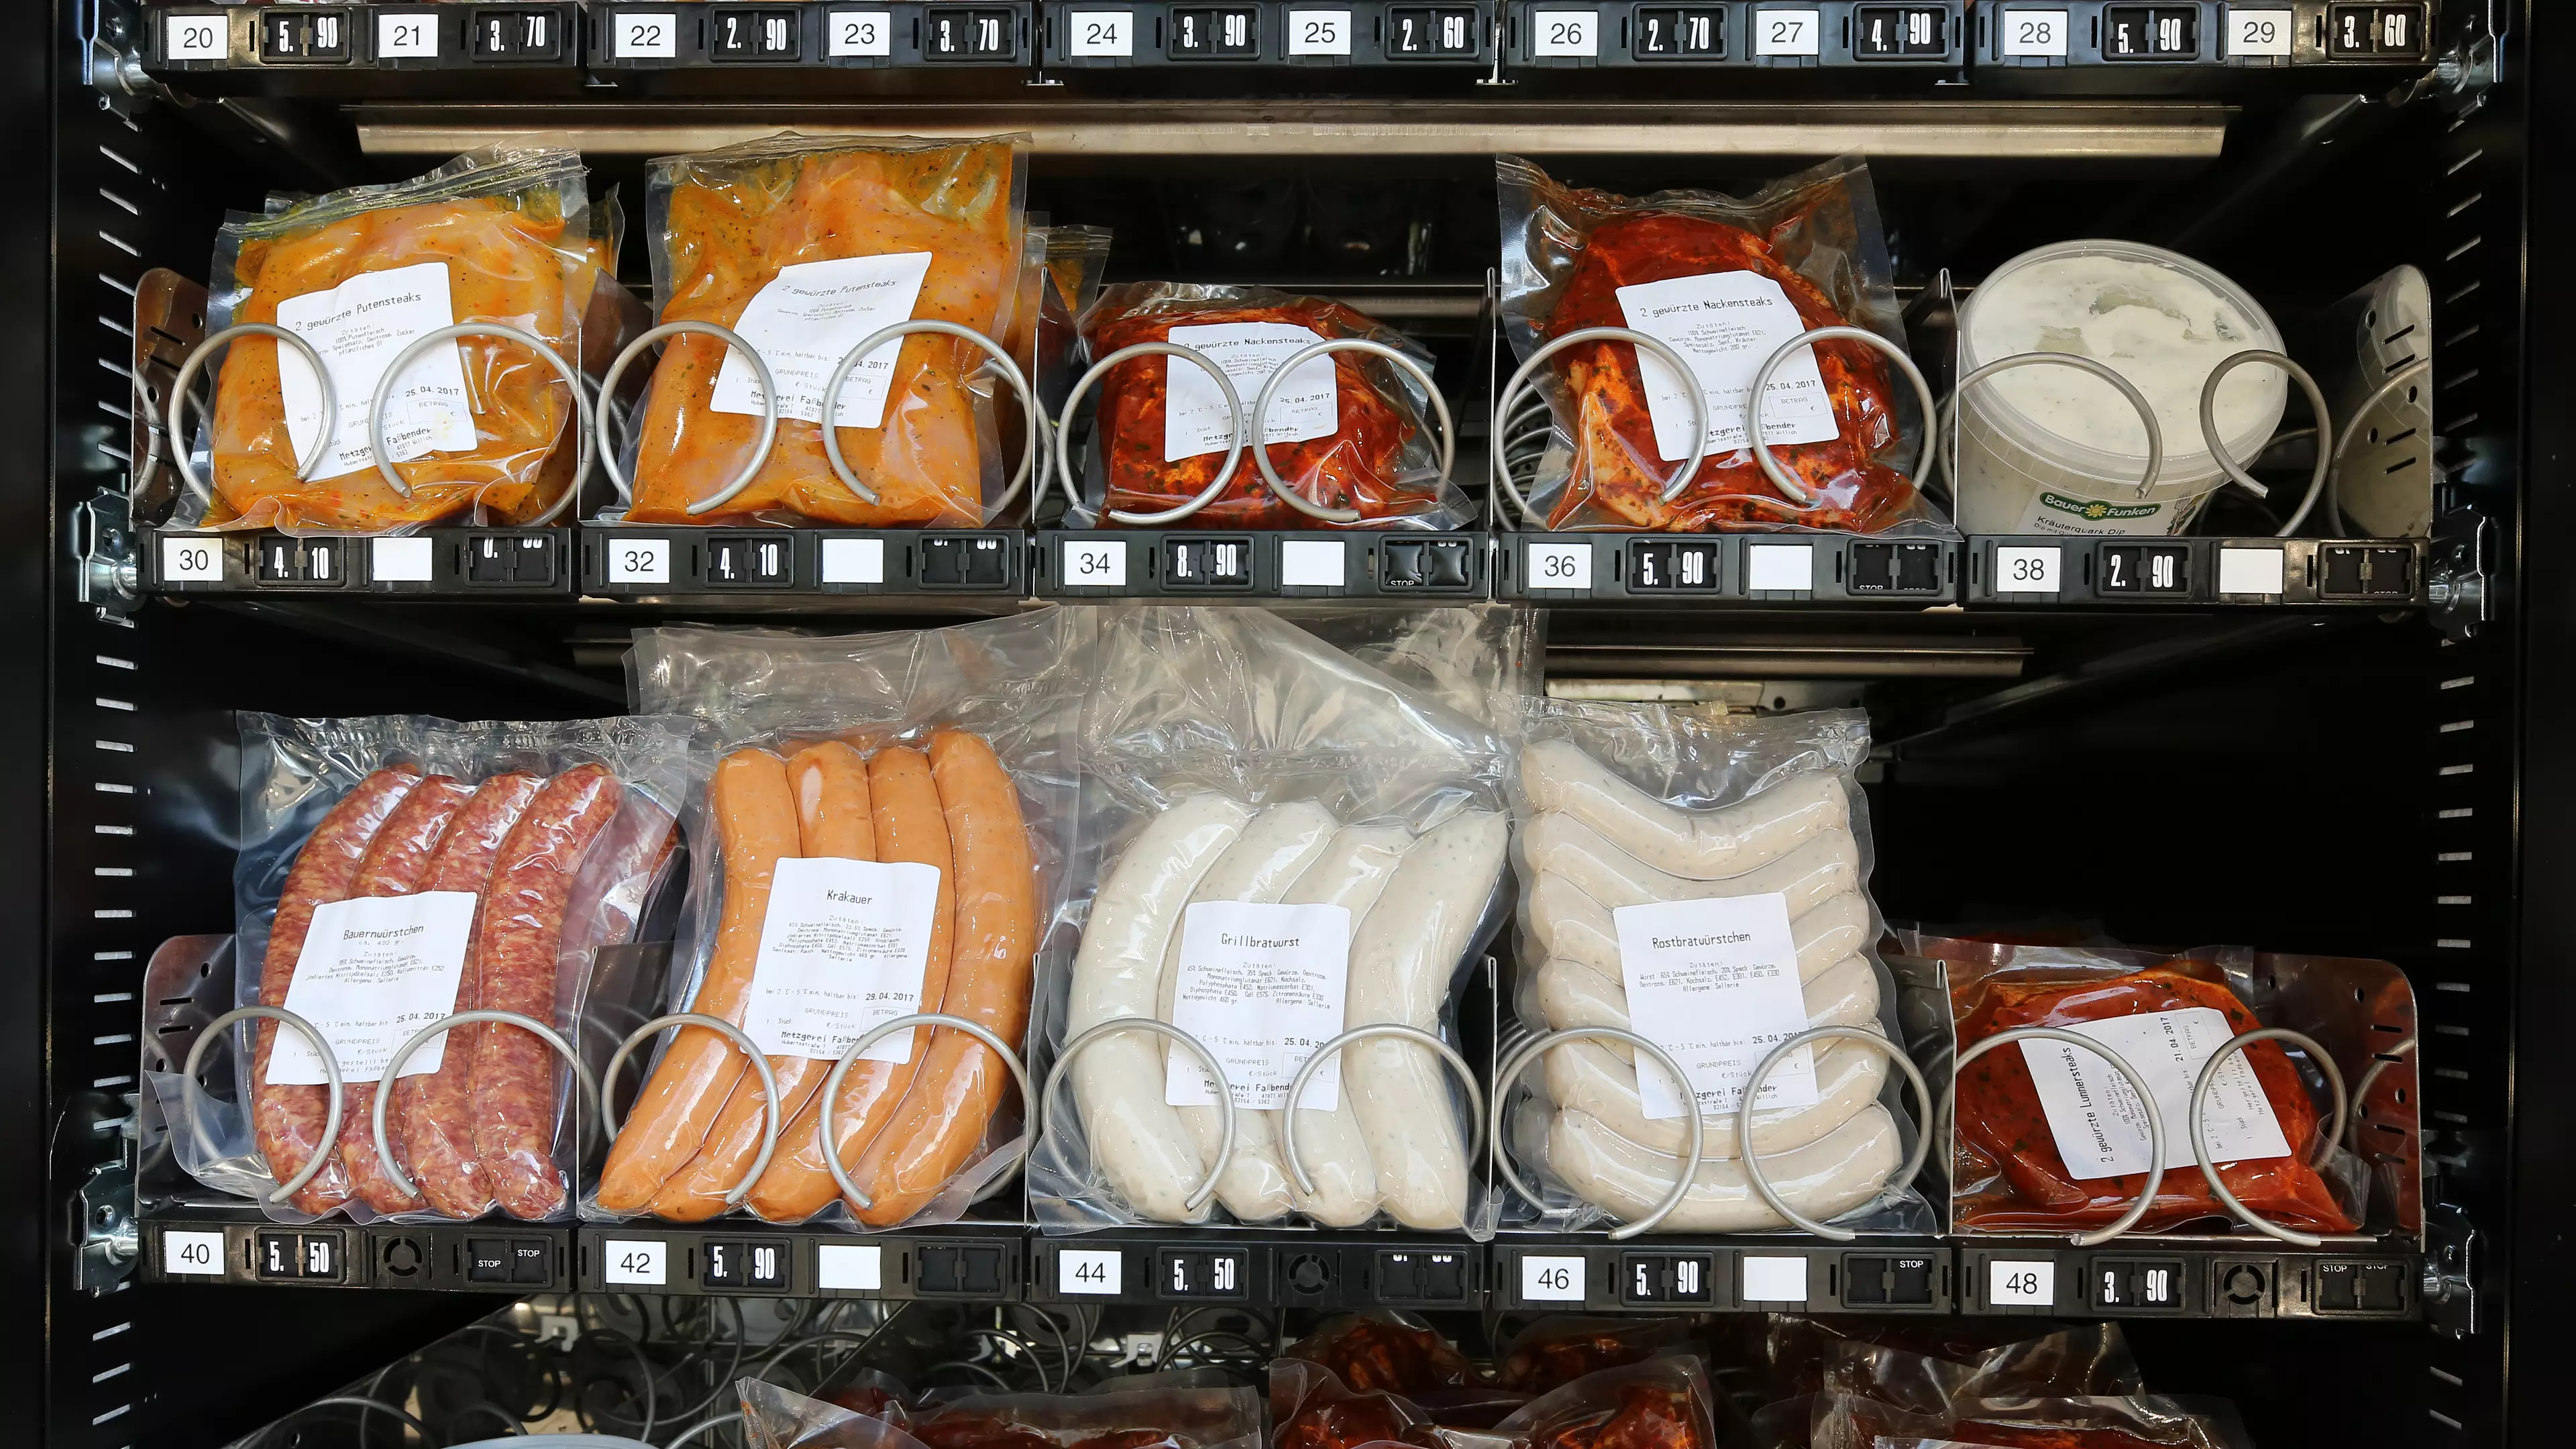 Business Is 'Booming' For Vending Machines Selling Sausages In Germany